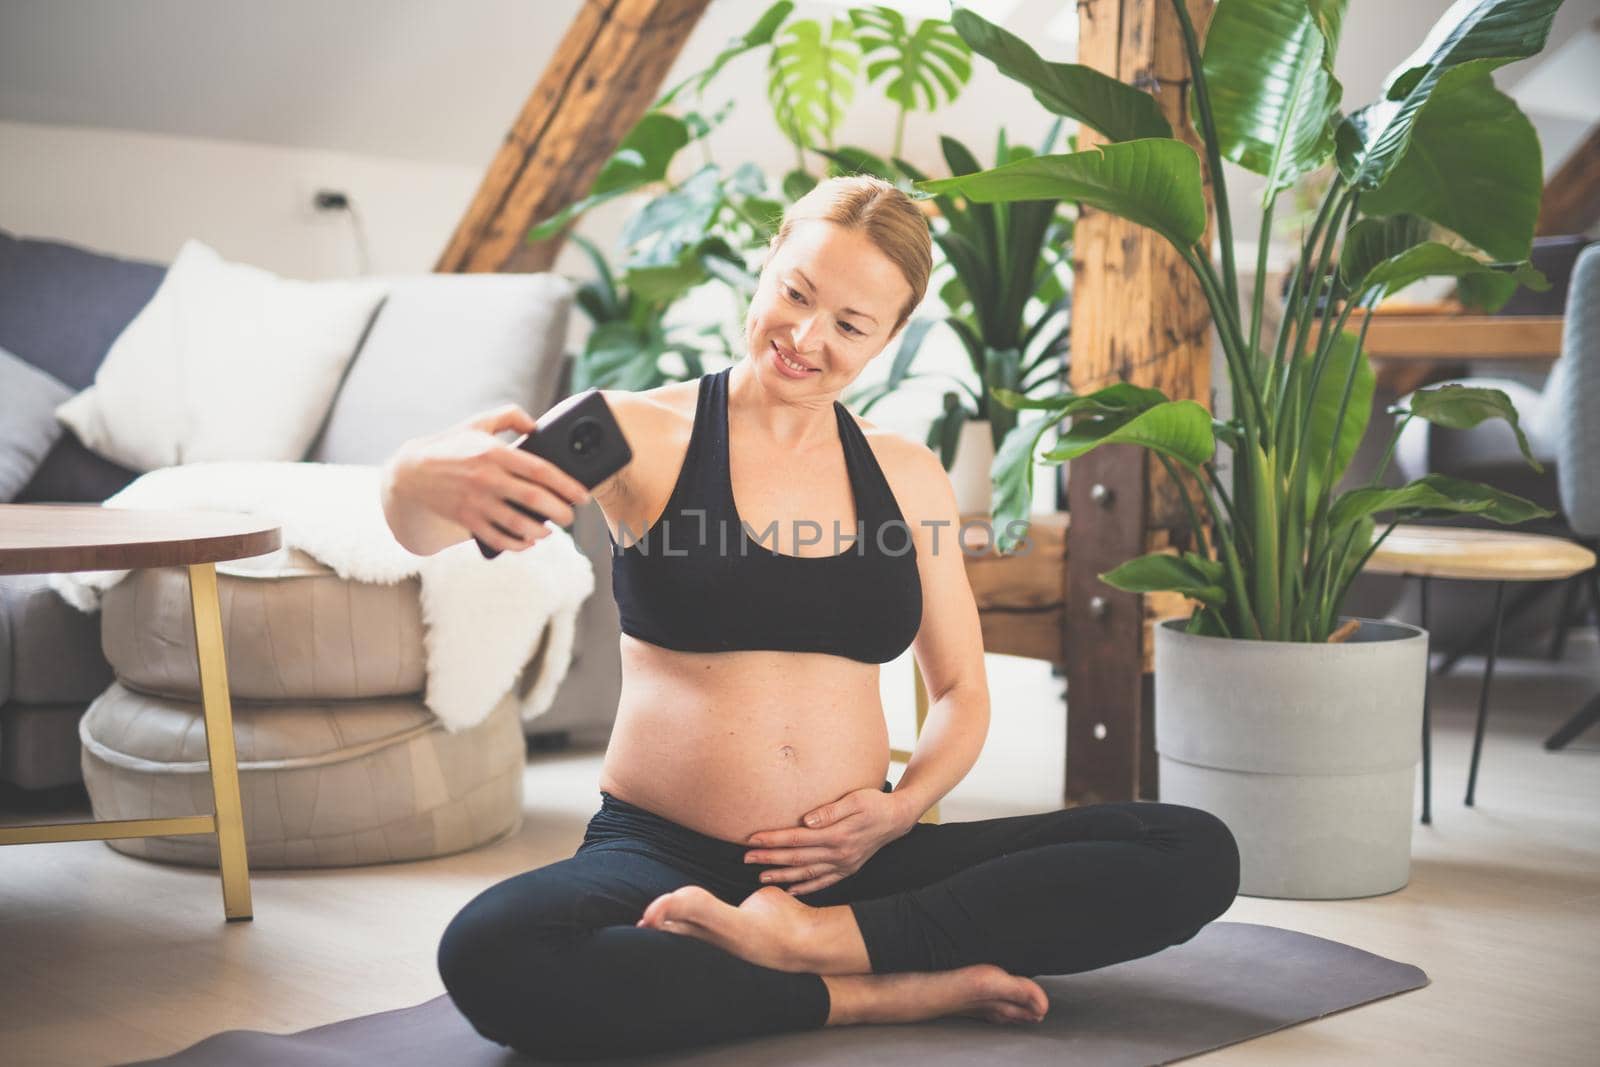 Young happy and cheerful beautiful pregnant woman taking selfie with her mobile phone while staying fit, sporty and active on her maternity leave. Motherhood, pregnancy, yoga concept